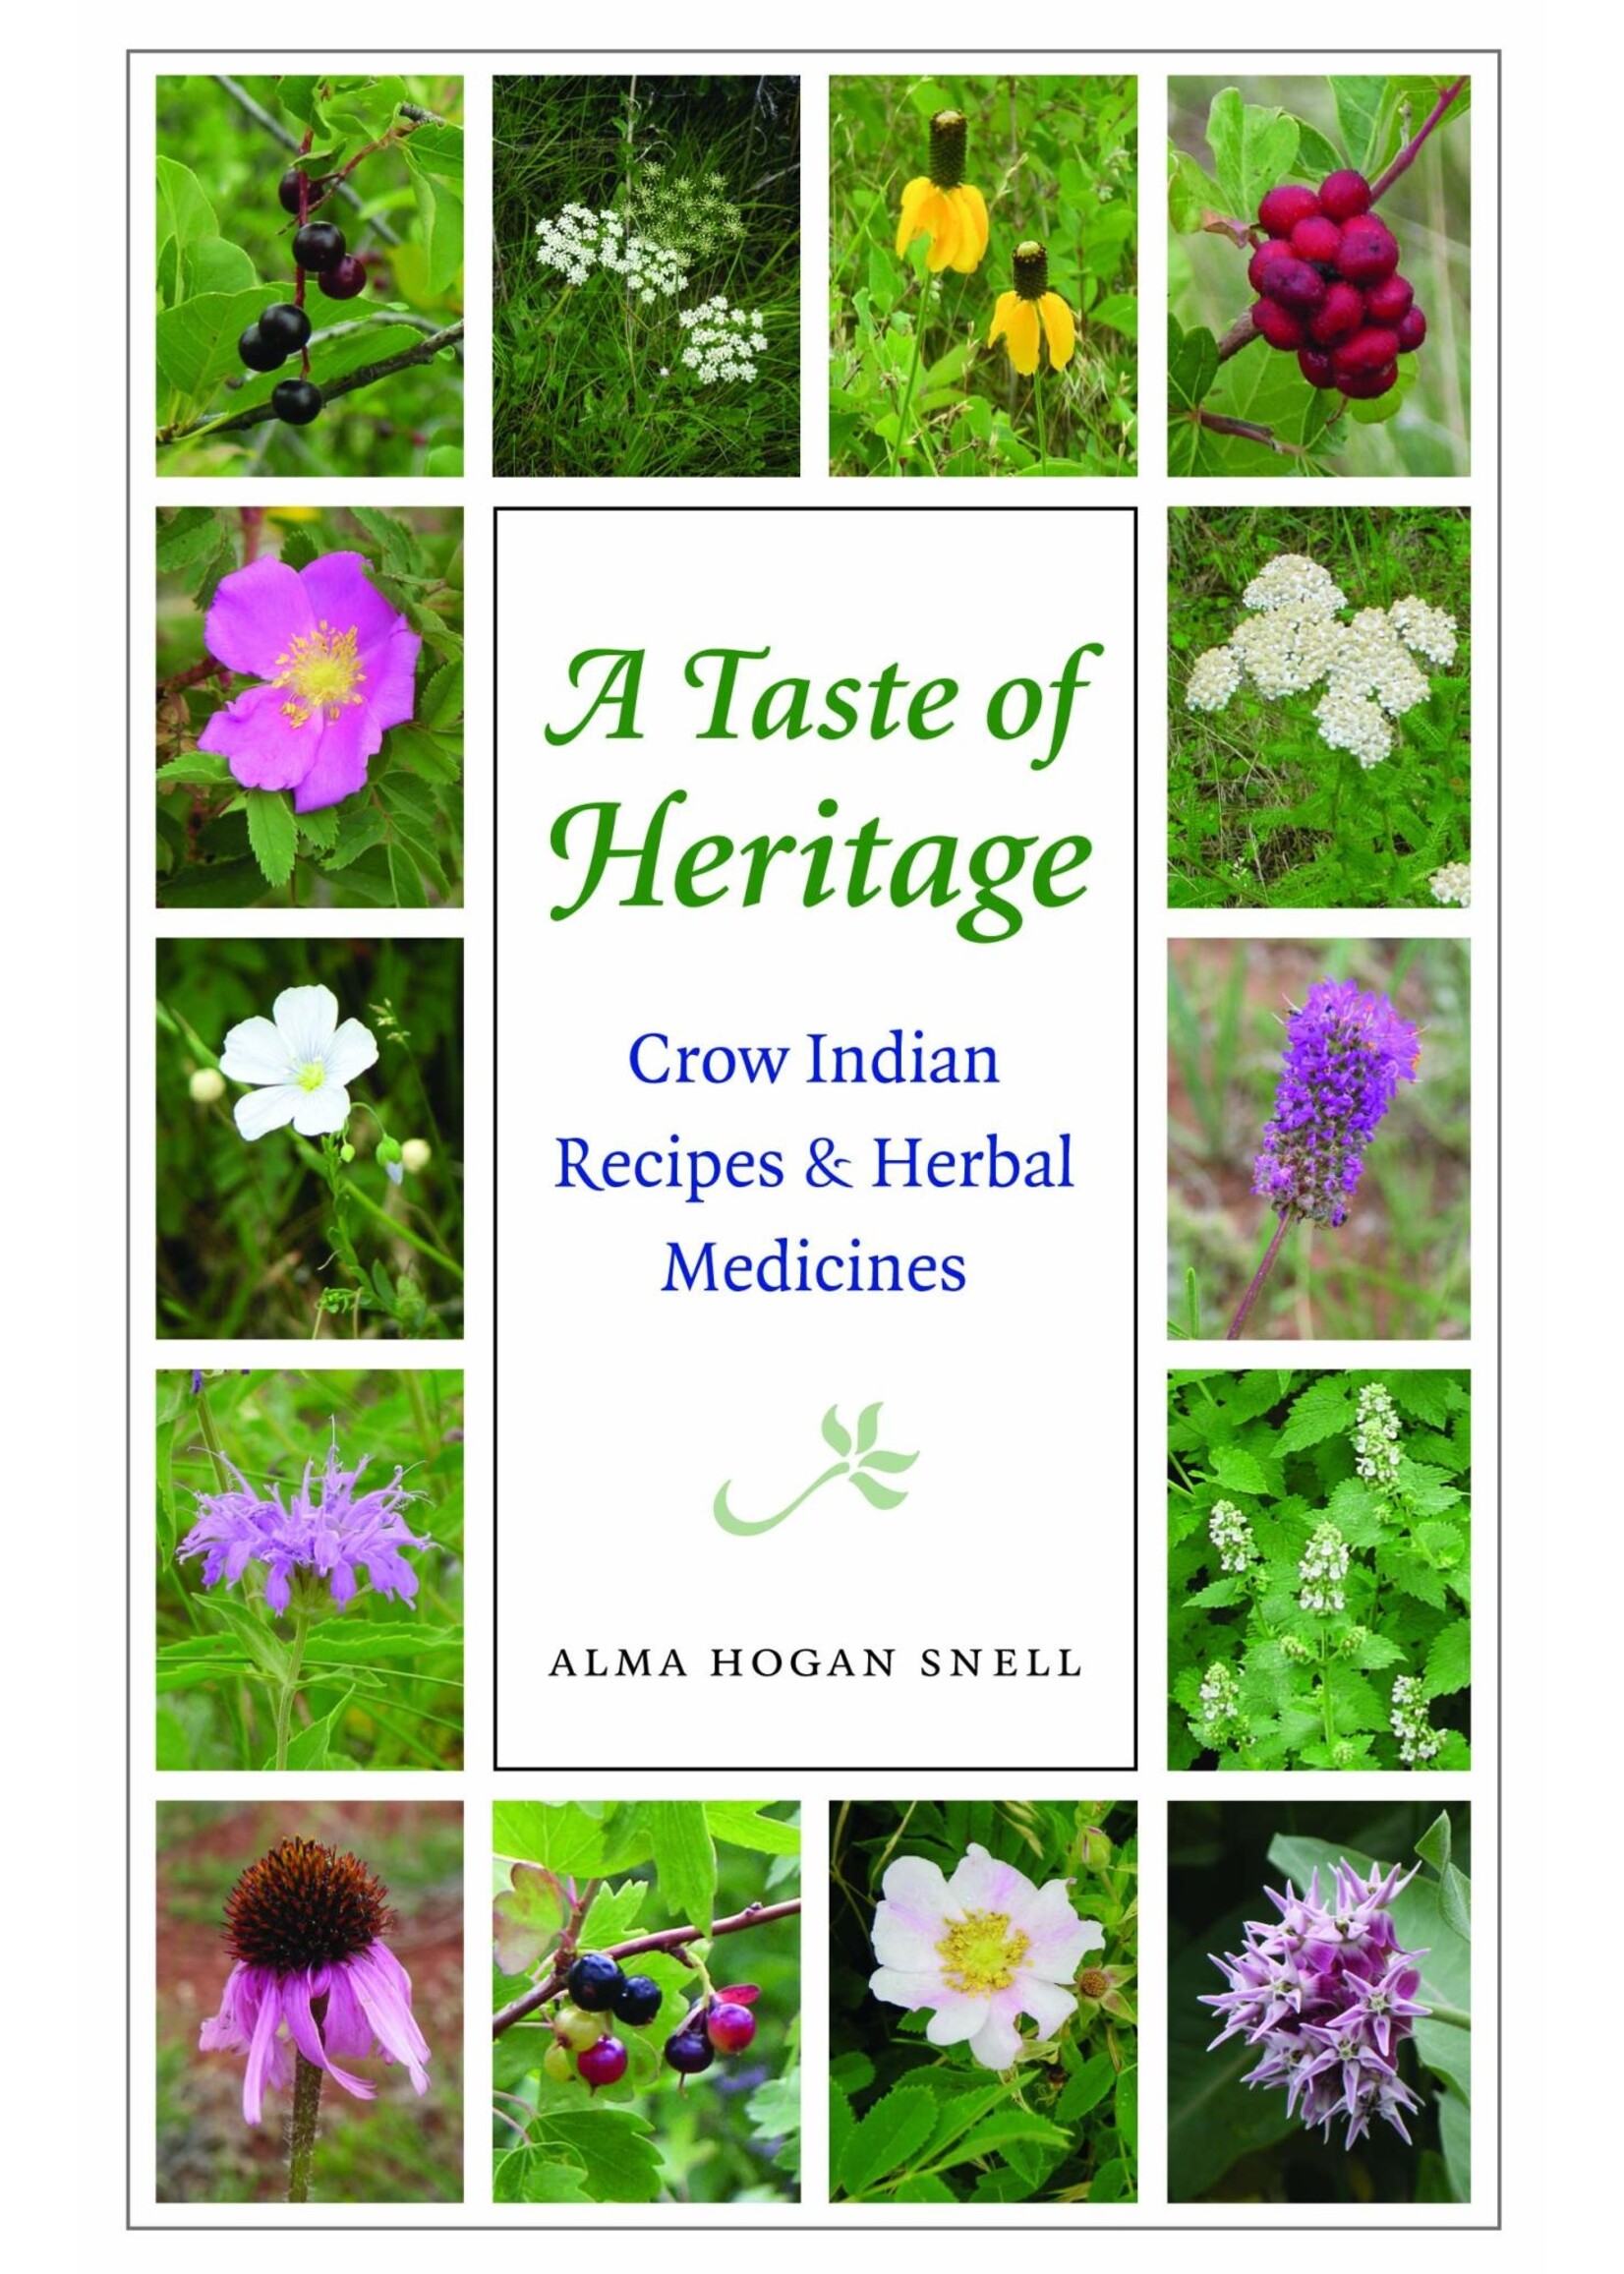 A Taste of Heritage: Crow Indian Recipes & Herbal Medicine by Alma Hogan Snell